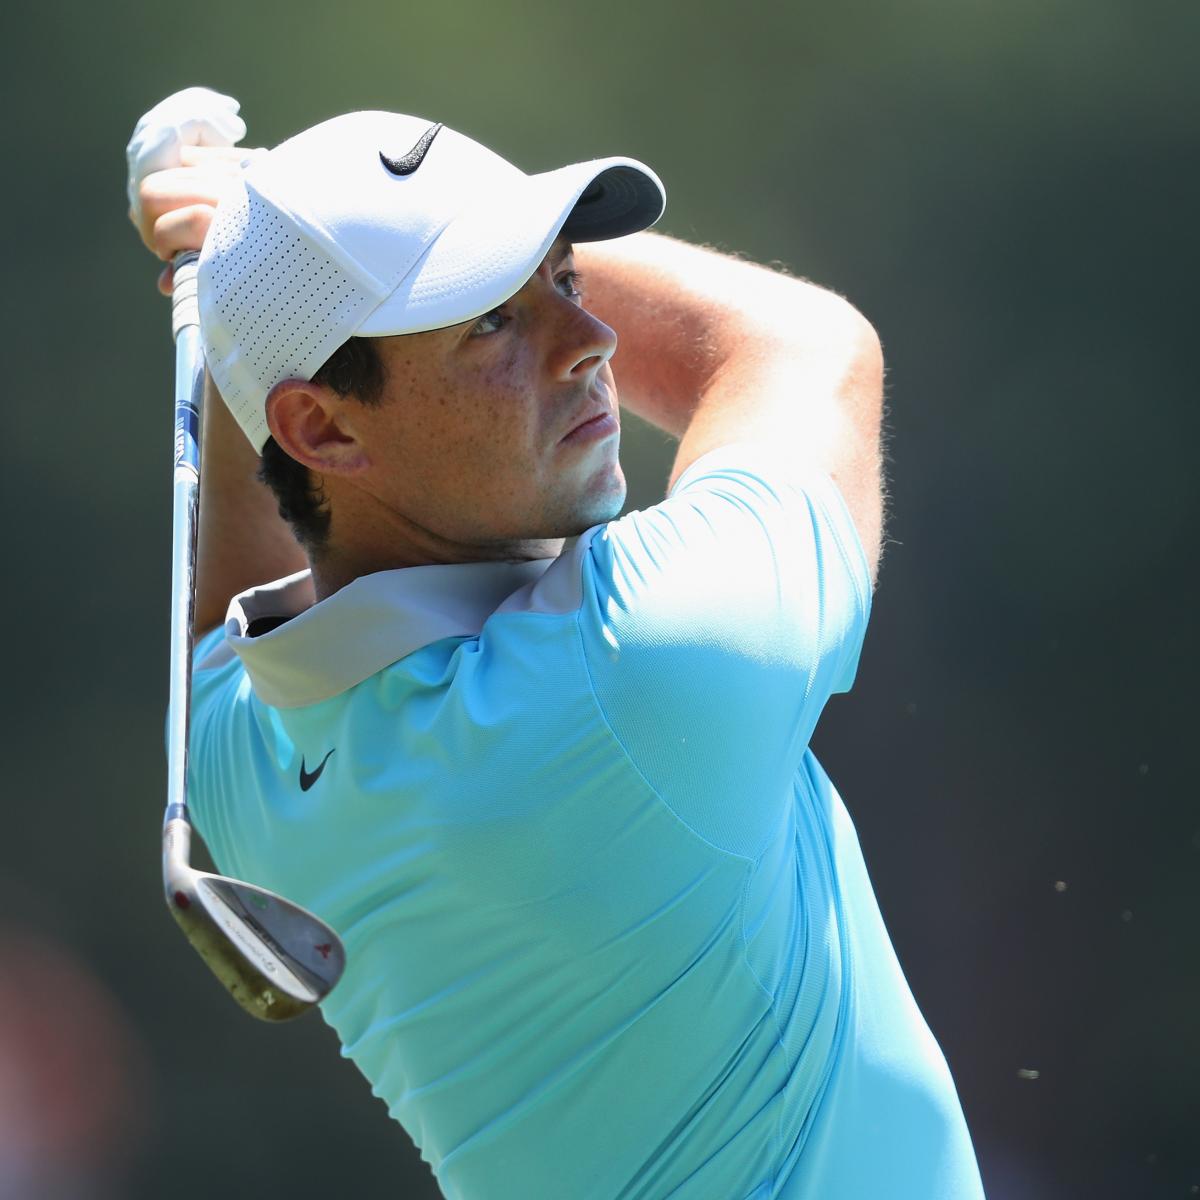 Rory McIlroy Shakes Off Back Injury for Solid 2nd Round at Players